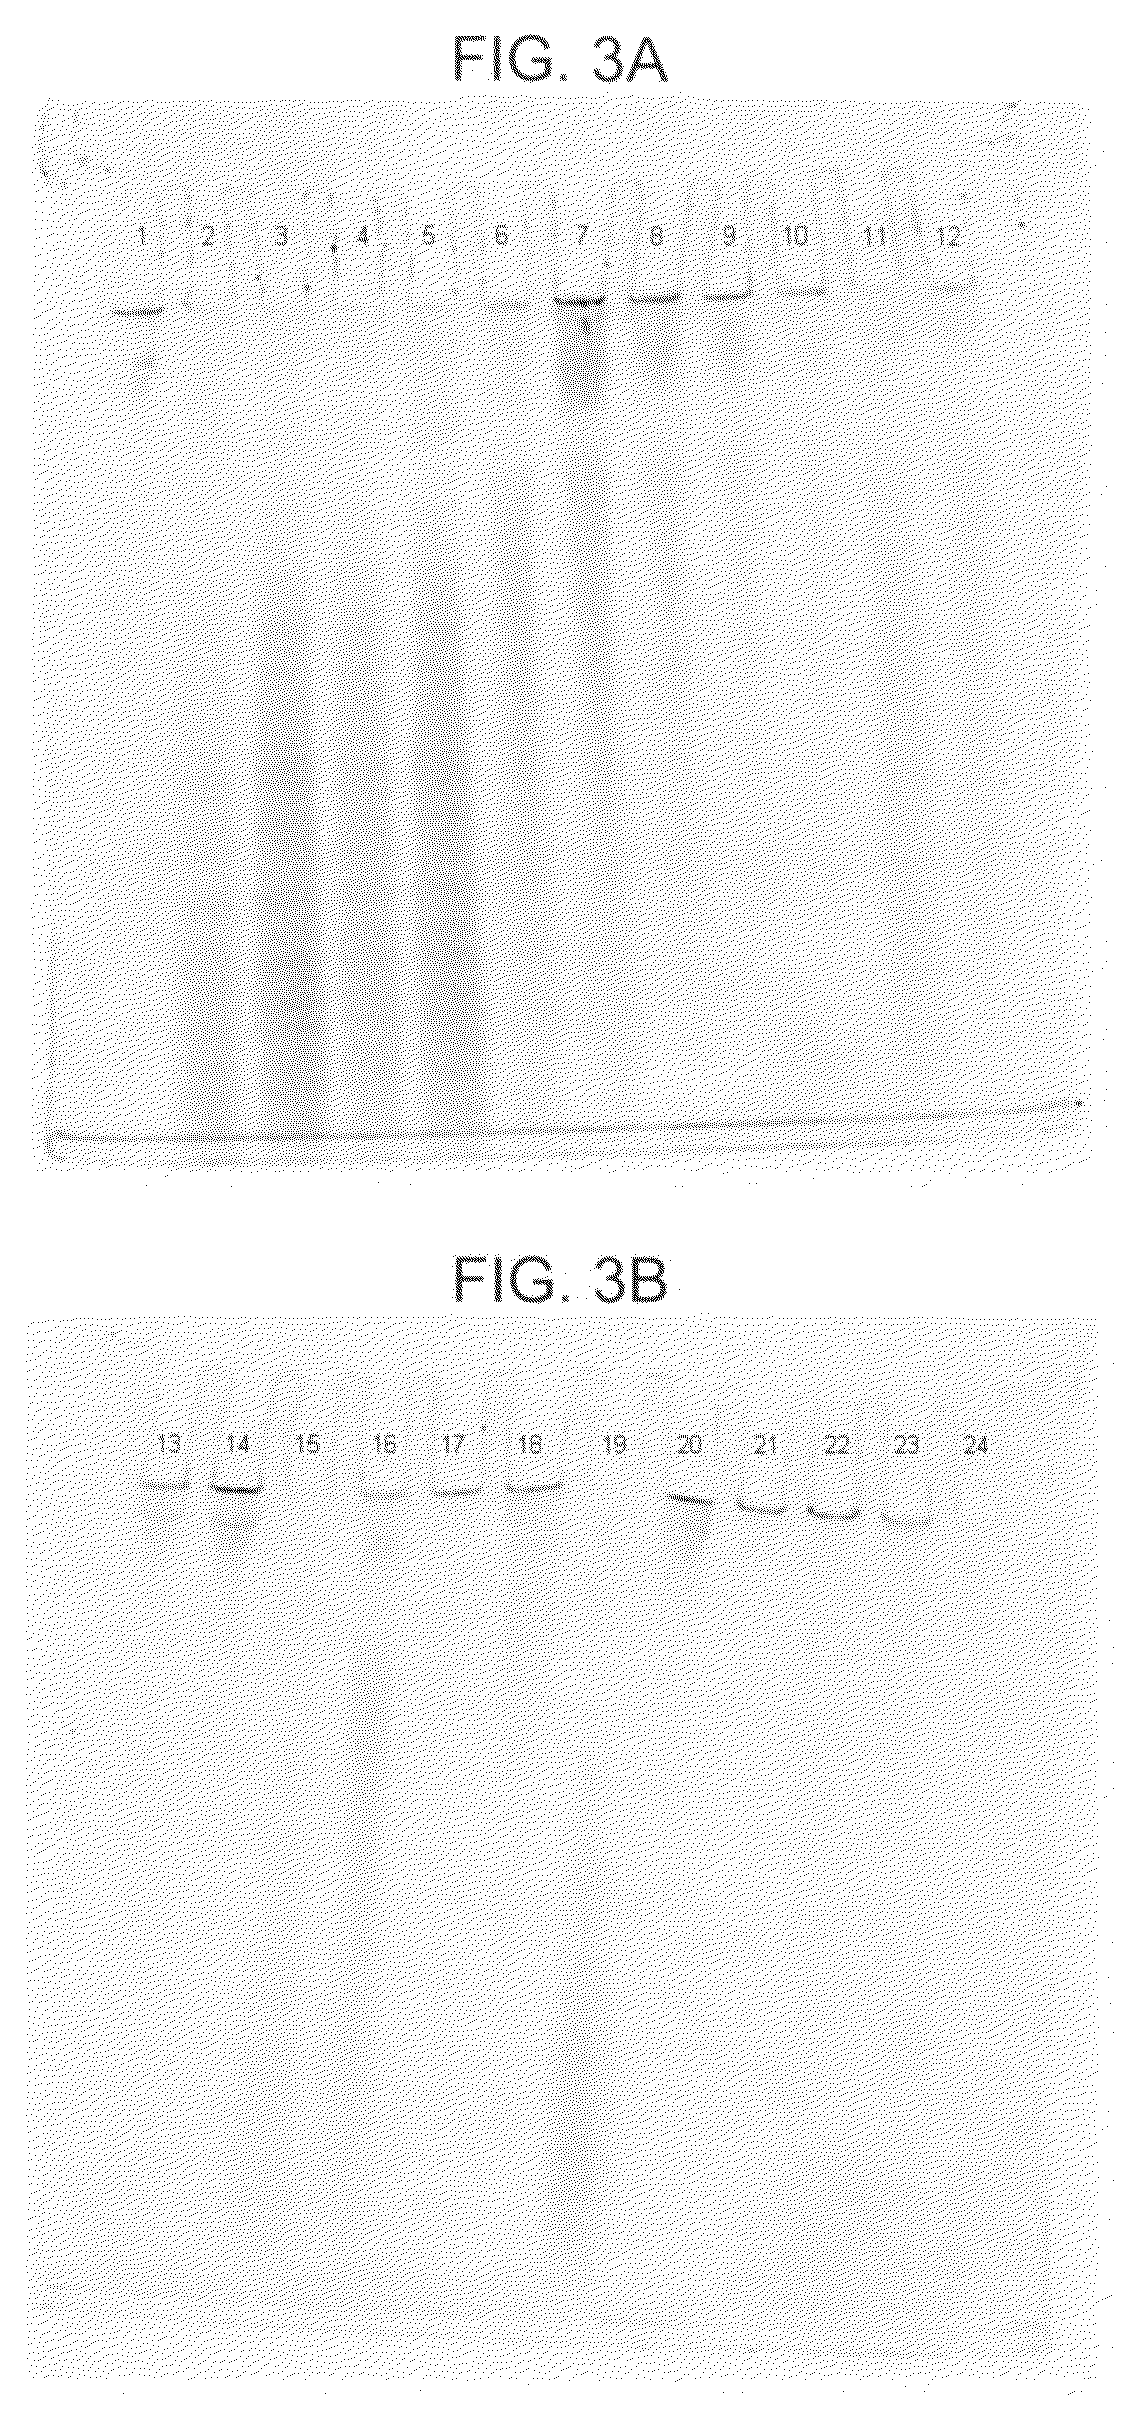 Methods of purifying a nucleic acid and formulation and kit for use in performing such methods